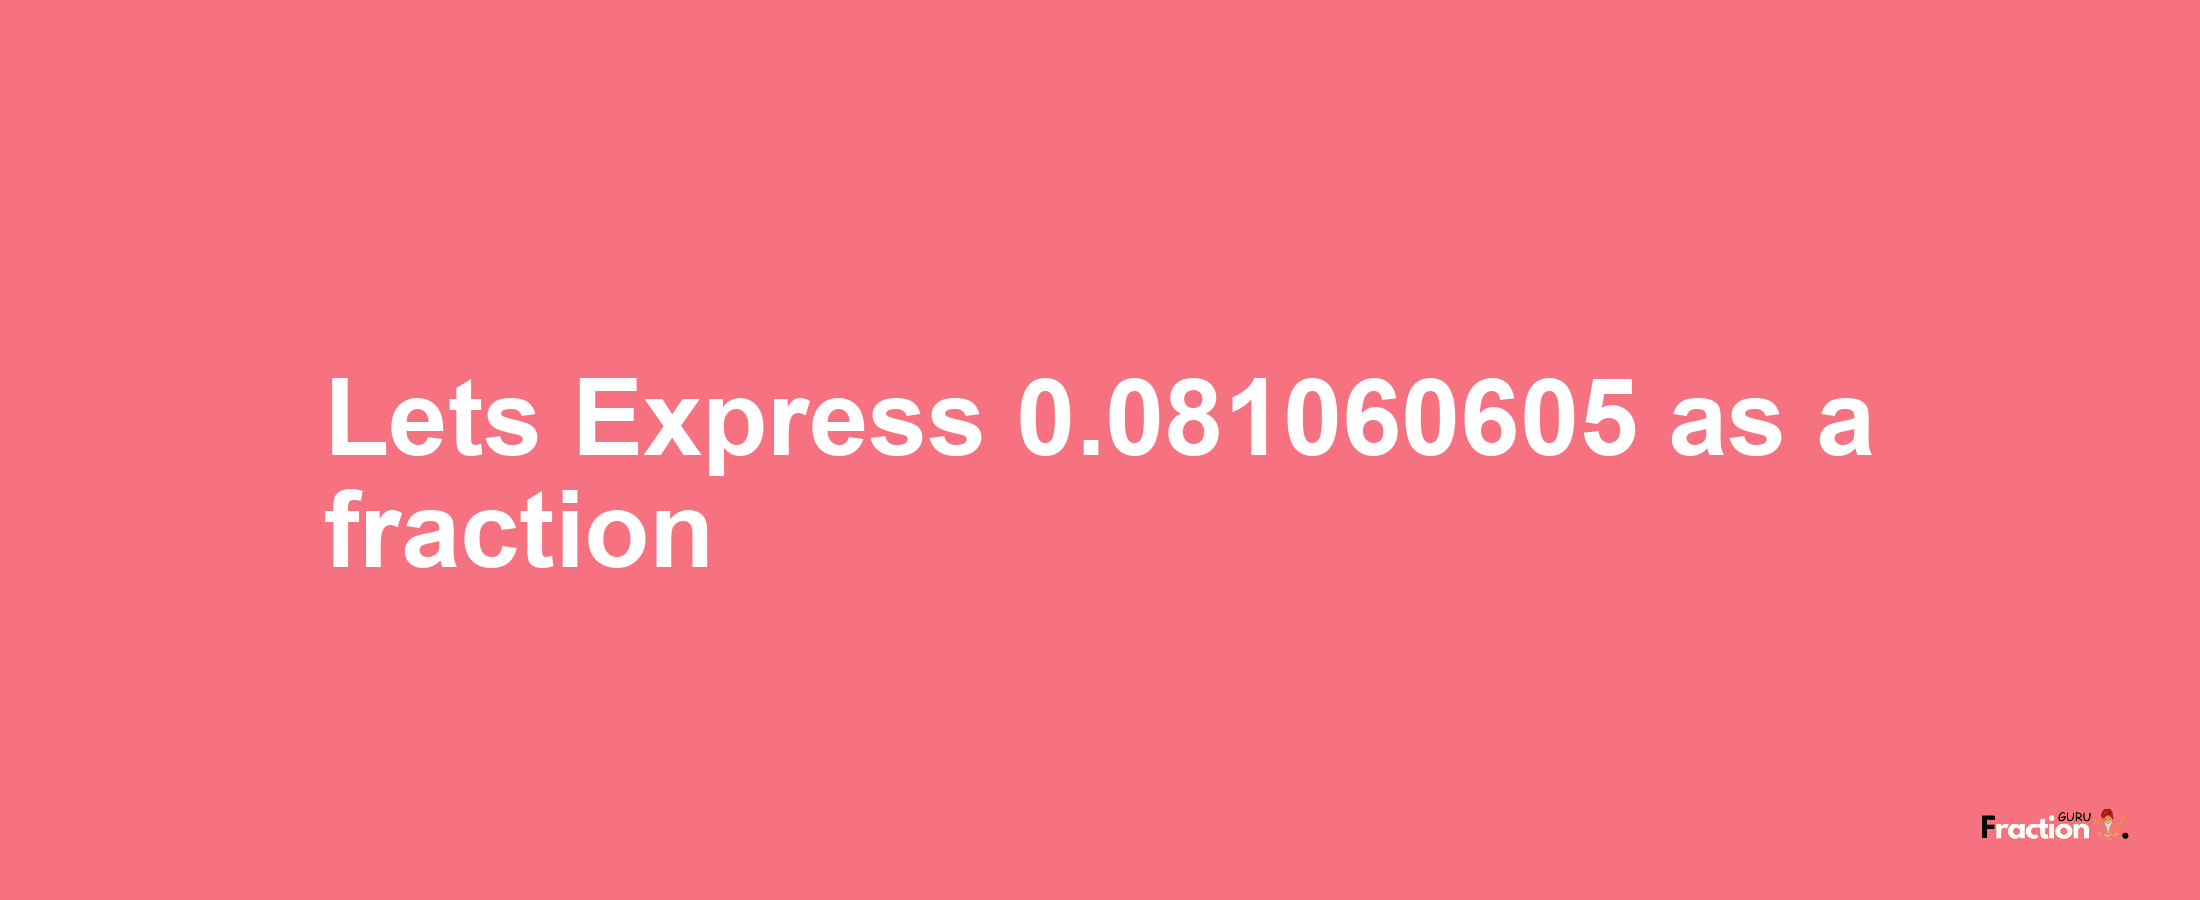 Lets Express 0.081060605 as afraction